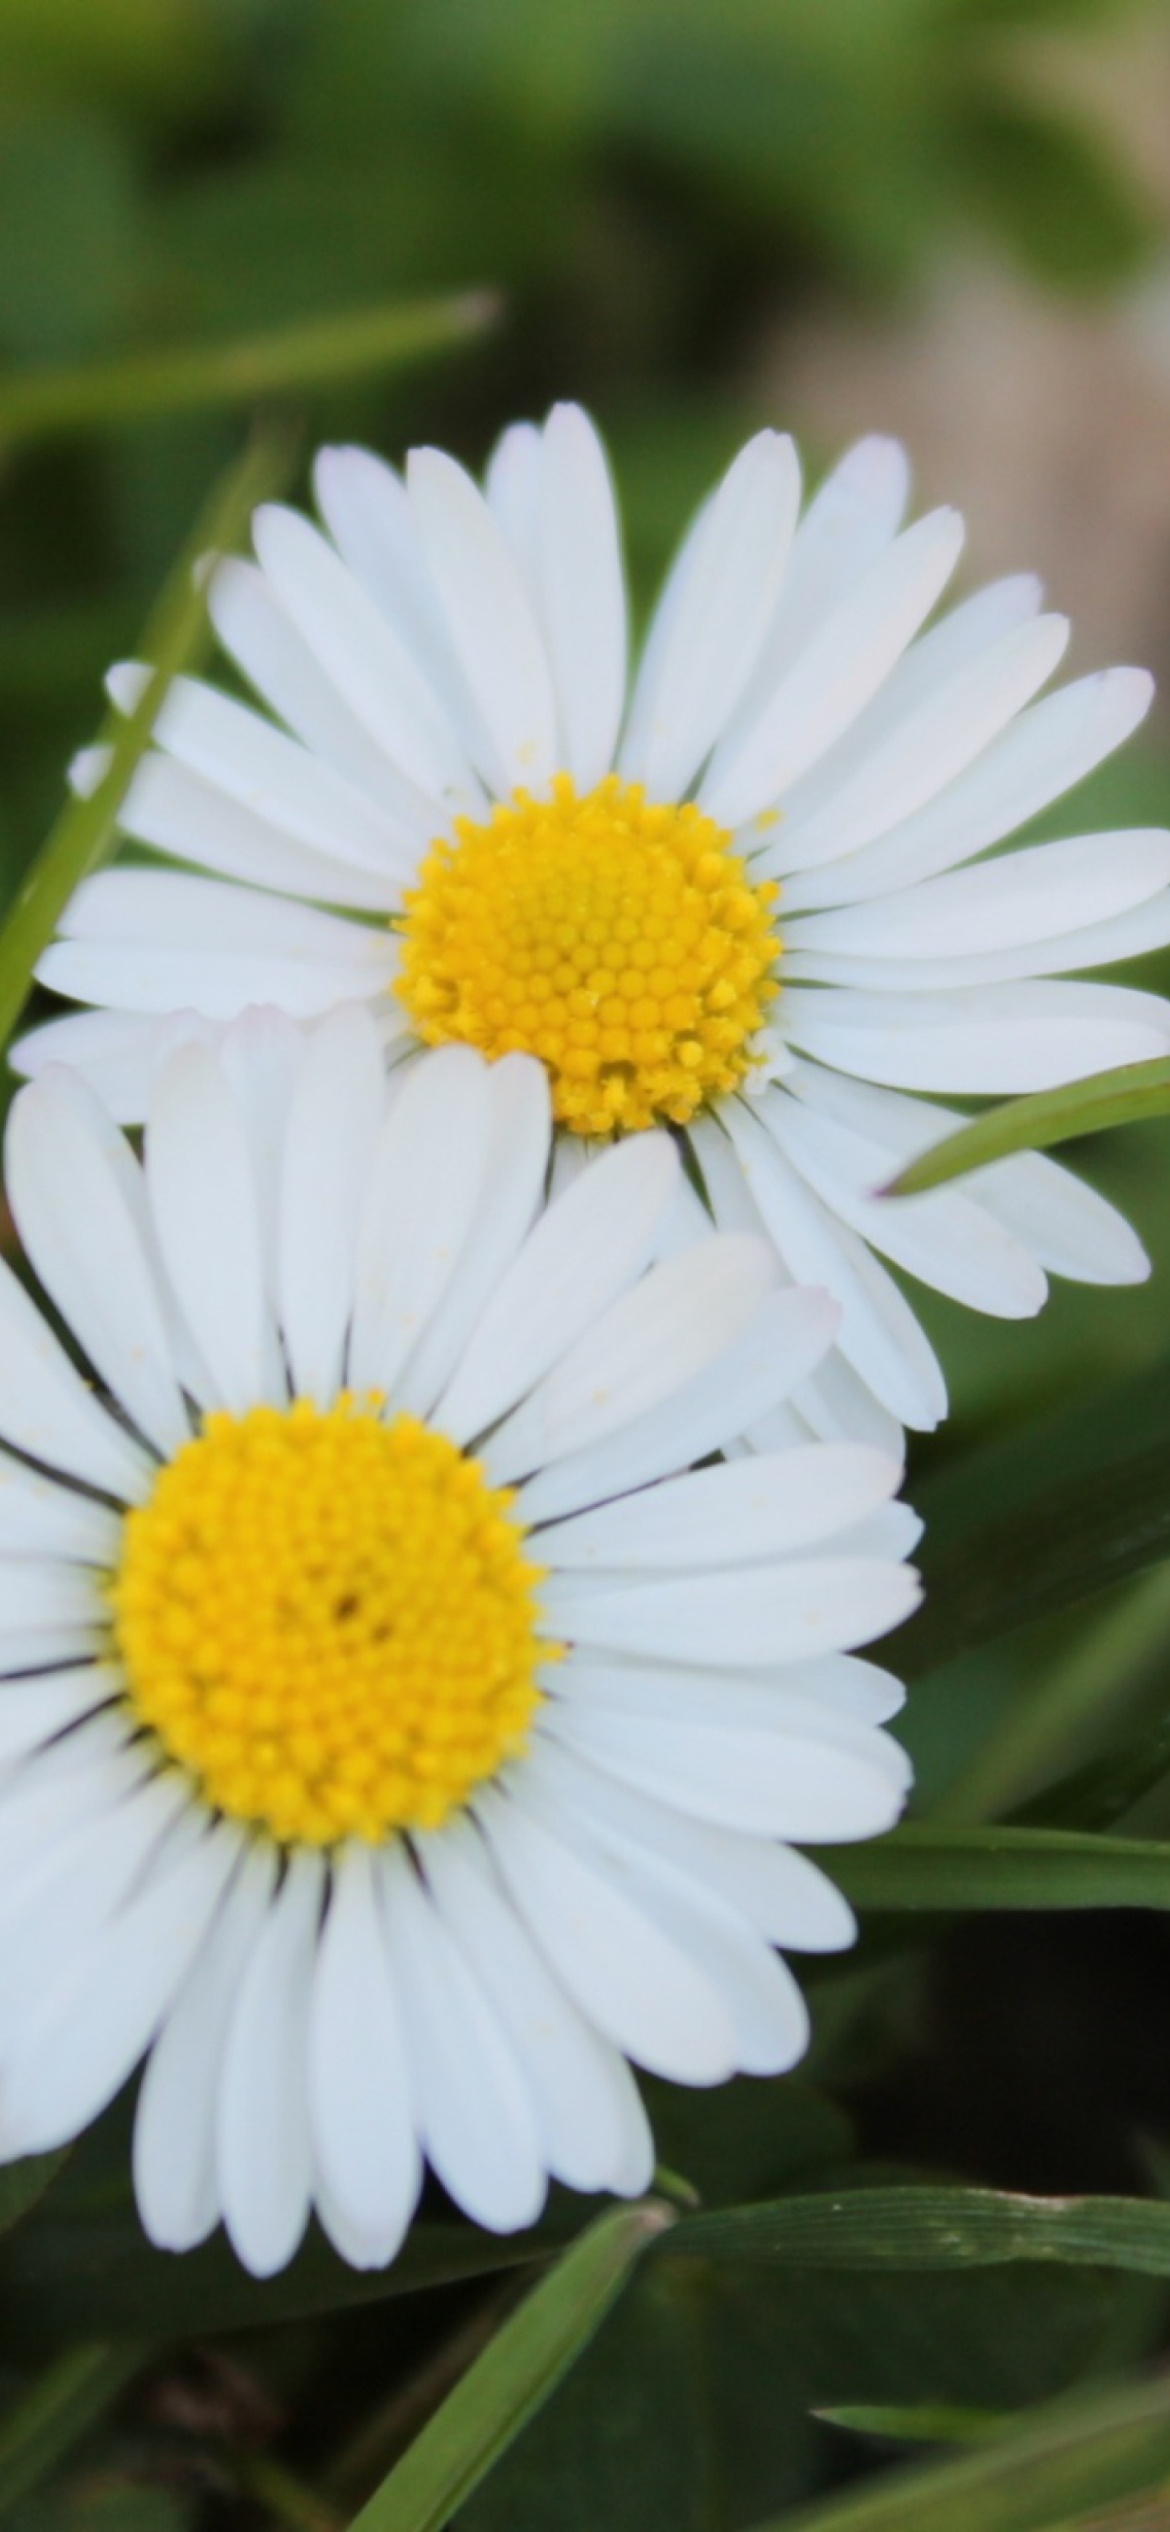 Two Daisies wallpaper 1170x2532